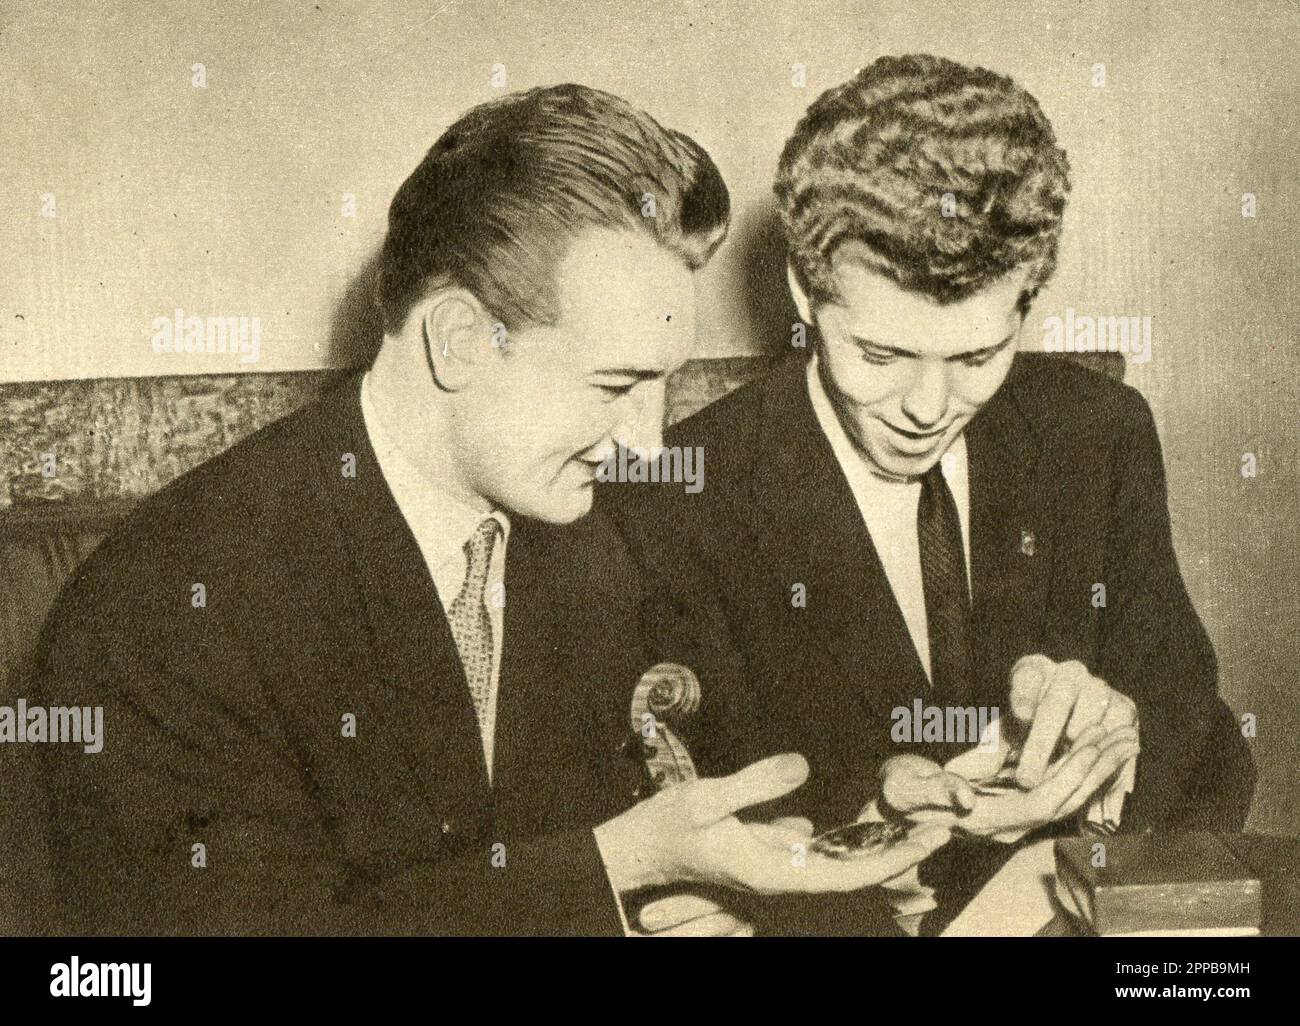 Old Vintage postcard of the USSR, 1961. The Laureates of the First Tchaikovski International  Contest of Pianists and Violinists V. Klimov (USSR) and Harvey Lavan 'Van' Cliburn, Jr. (USA) after receiving their gold medals (1958). Stock Photo